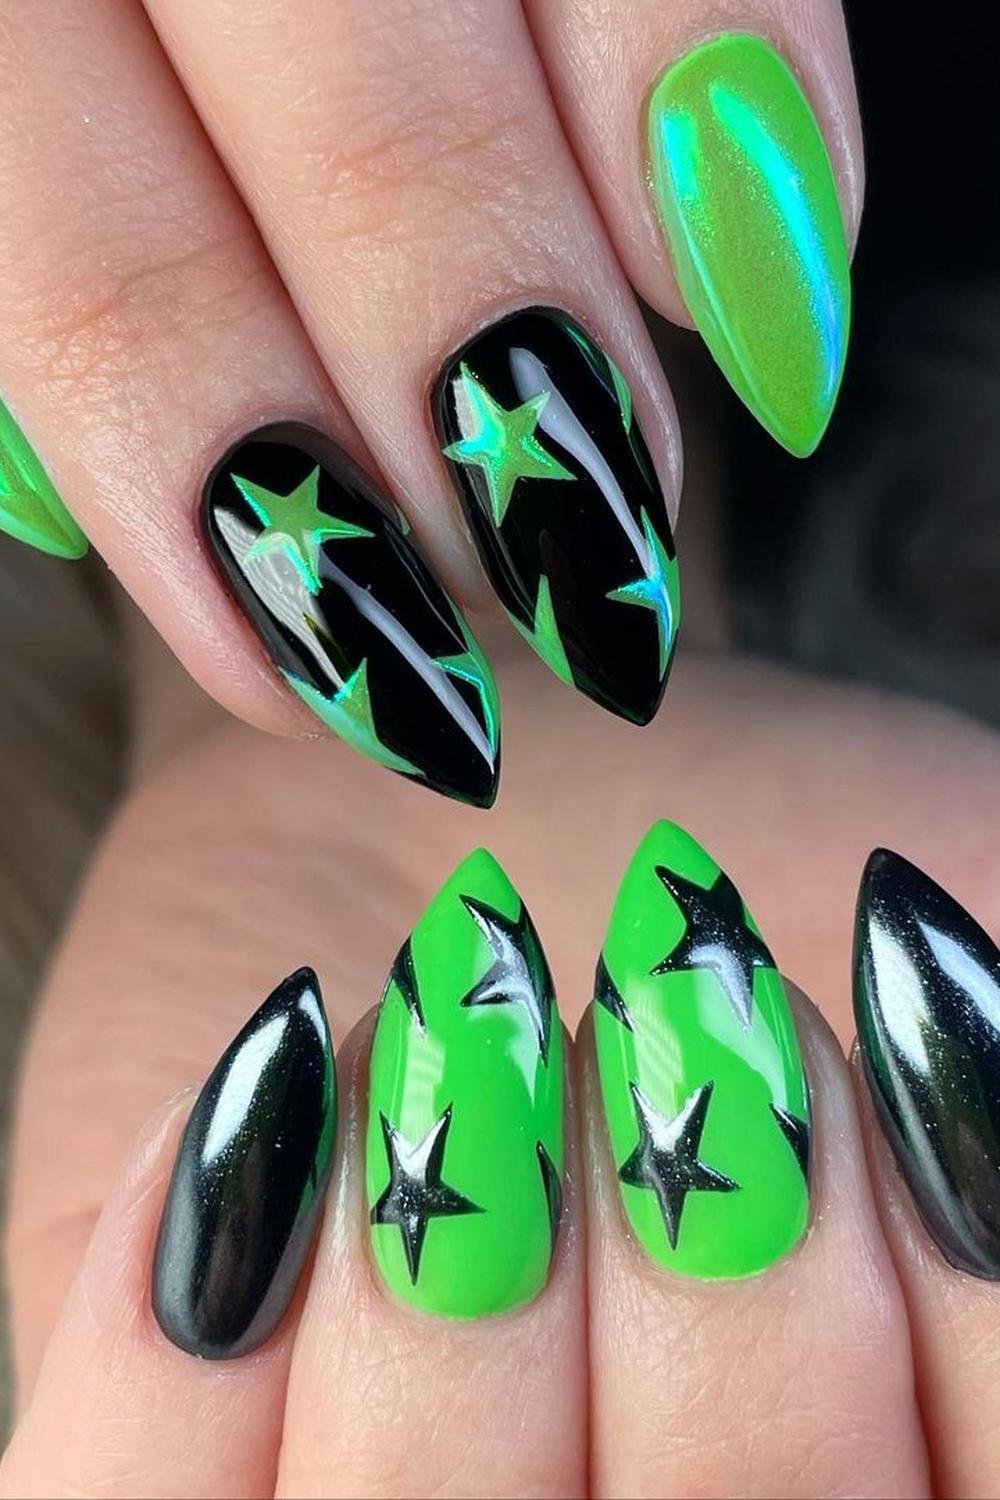 22 - Picture of Chrome Star Nails